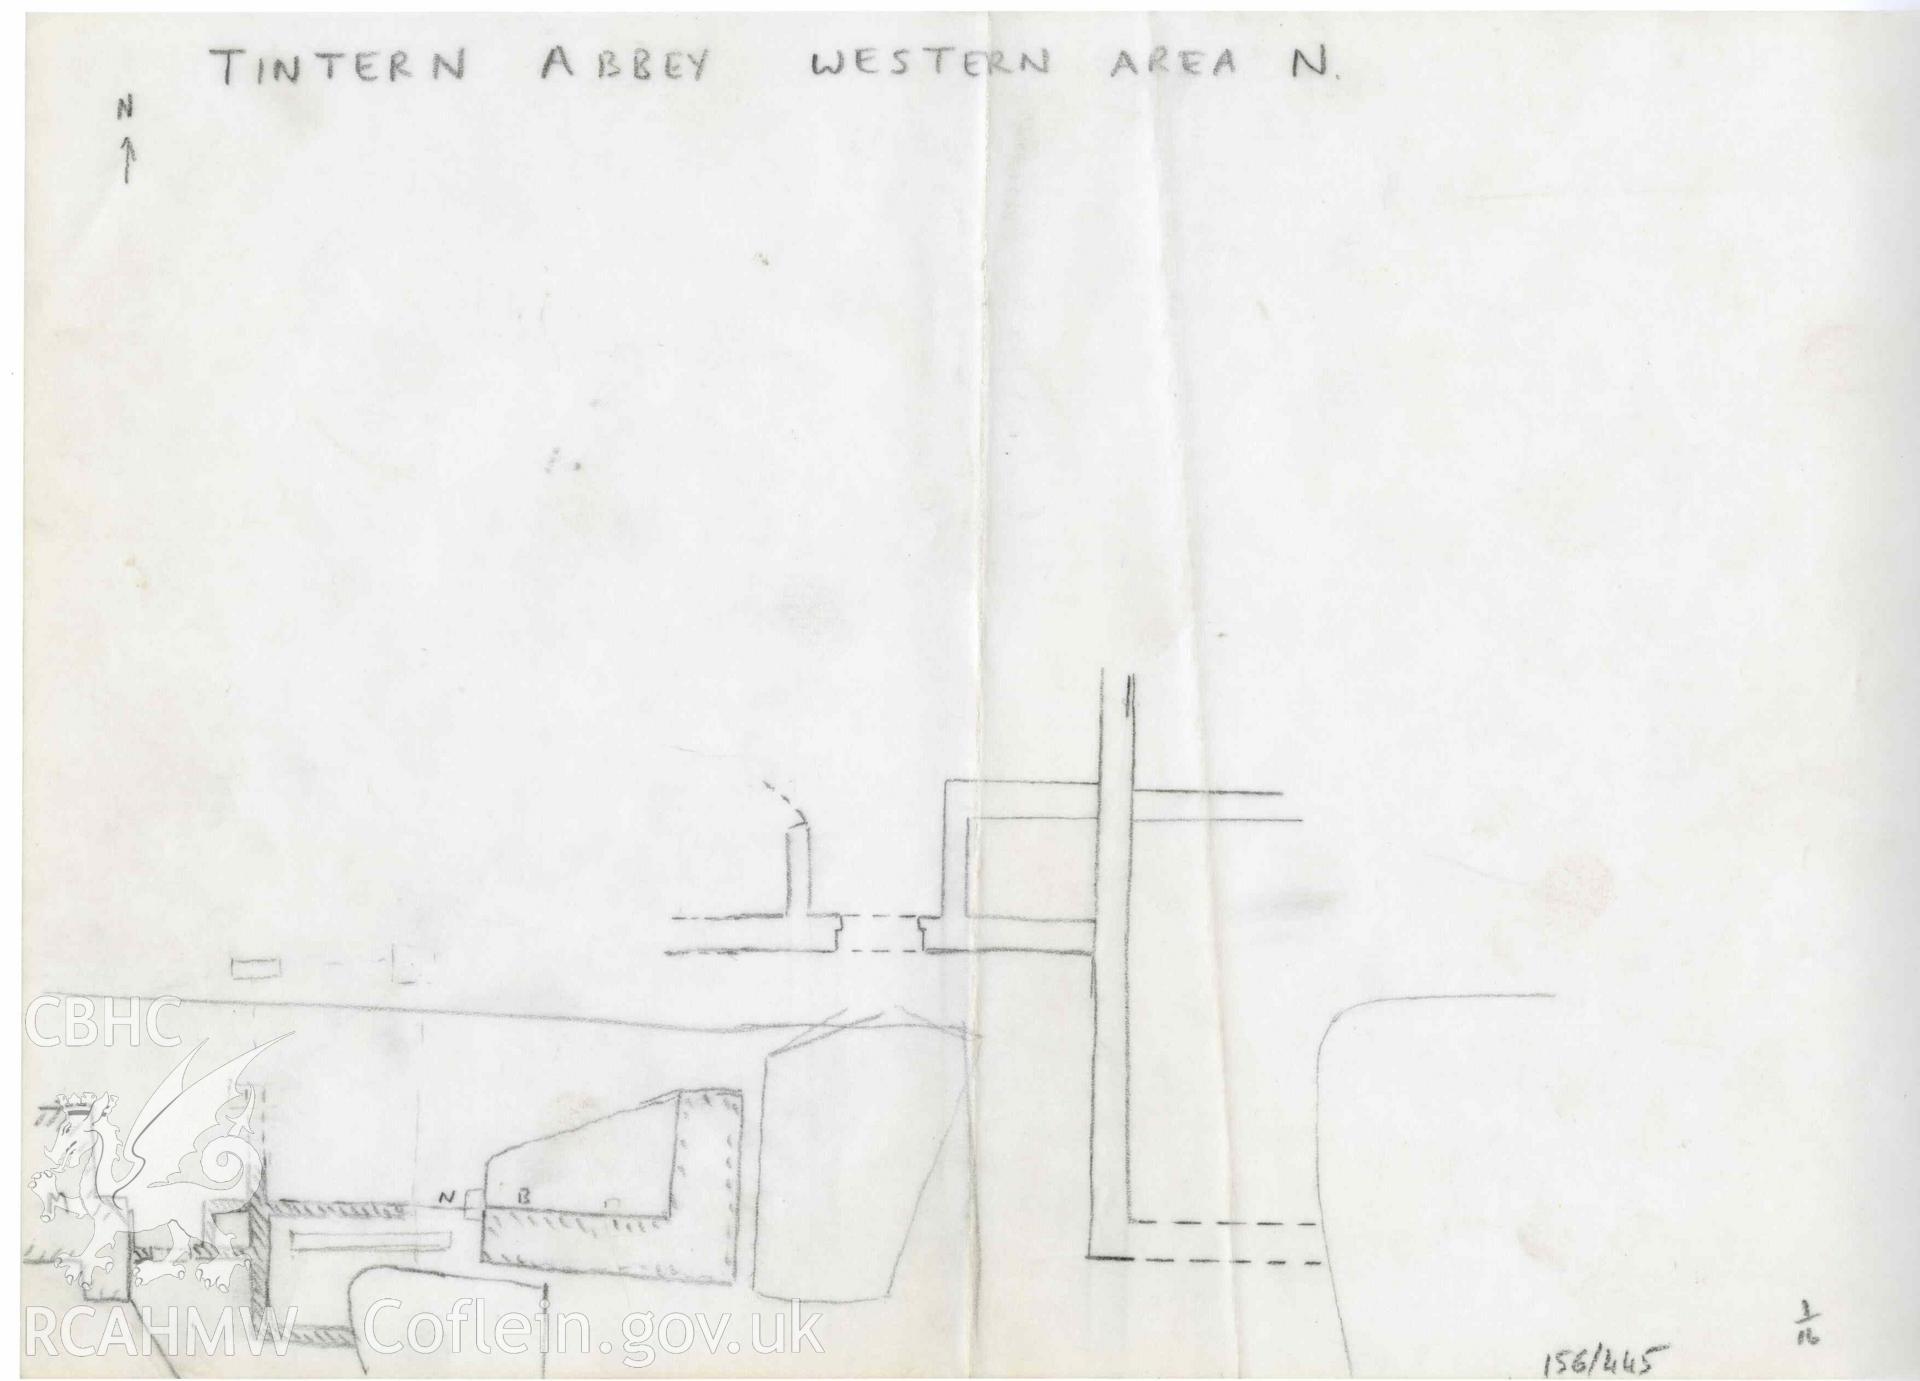 Cadw Guardianship monument drawing, sketch plan of western area, north, Tintern Abbey.